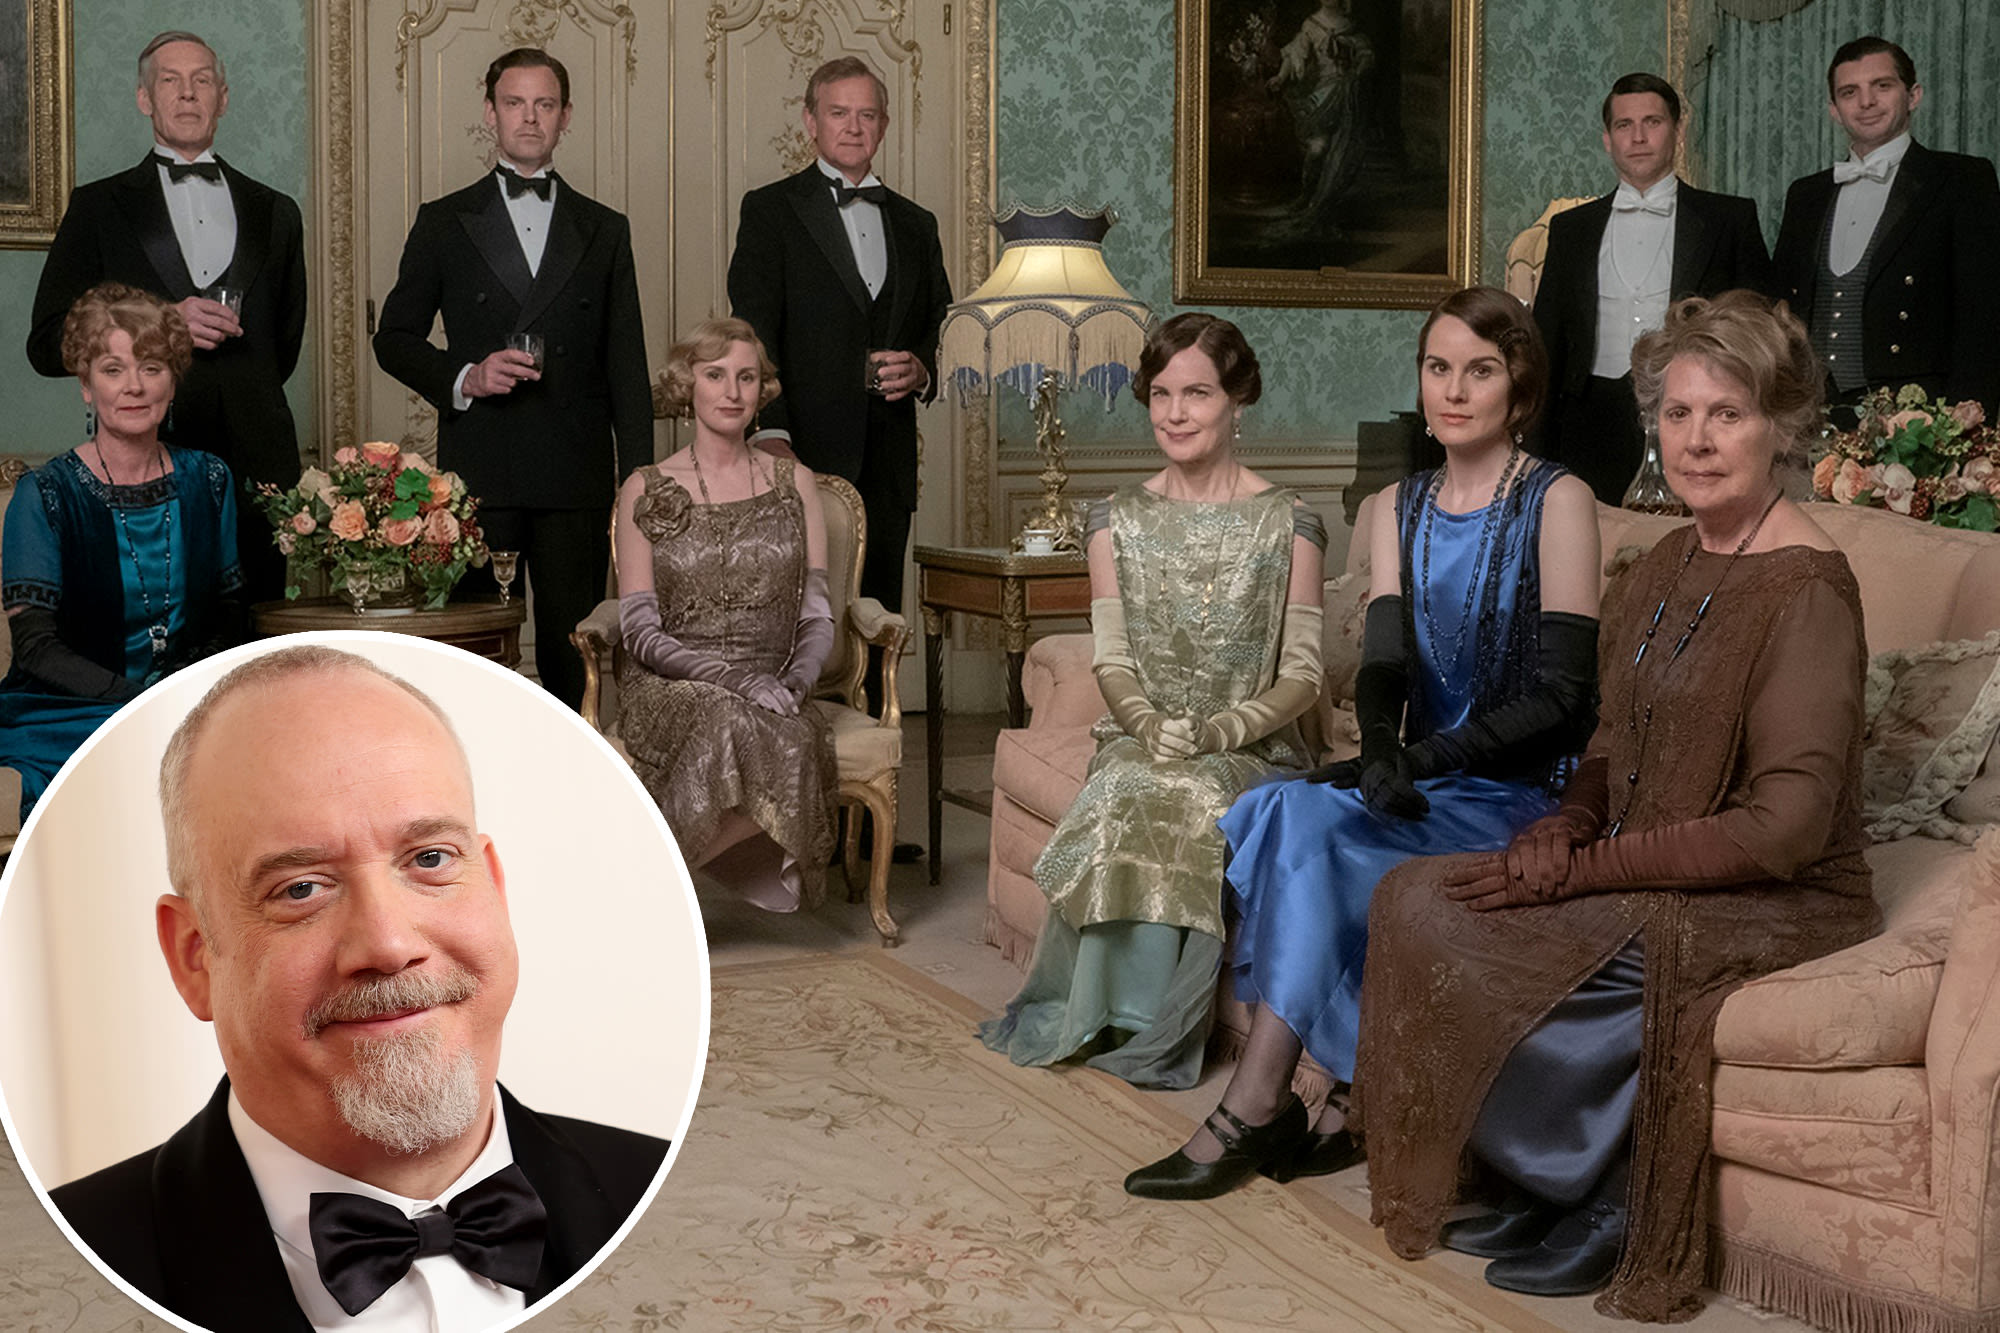 ‘Downton Abbey’ 3rd movie announced with Paul Giamatti: It’s ‘emotional,’ says Michelle Dockery